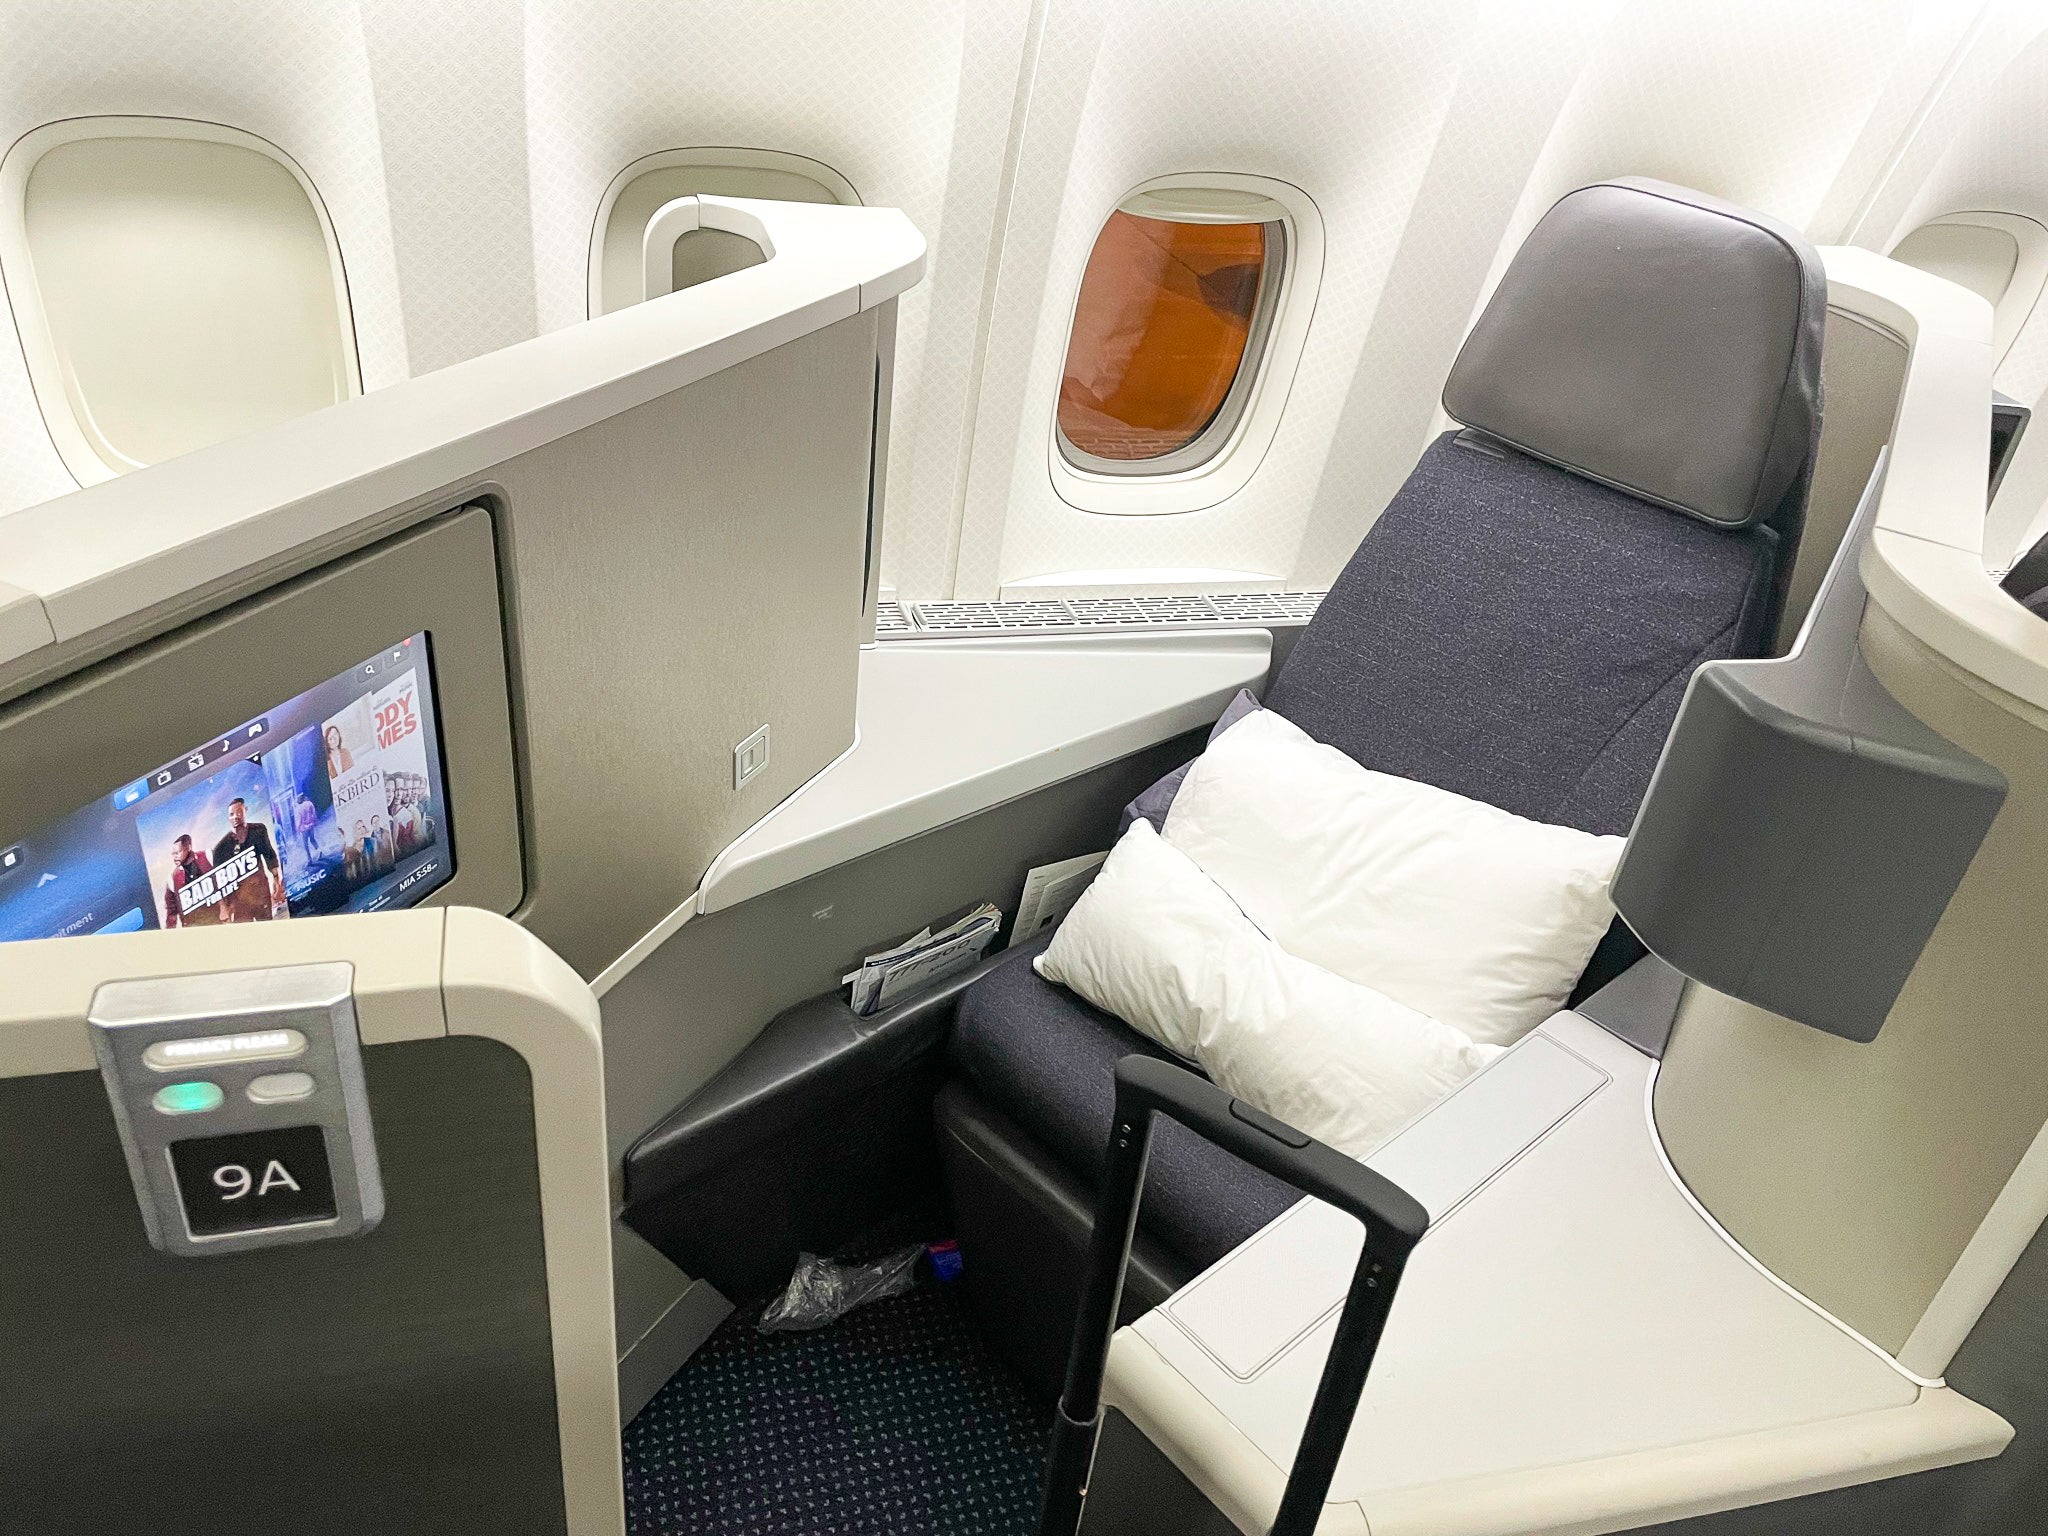 American Airlines 777 Flagship Business Class Seat GIG MIA